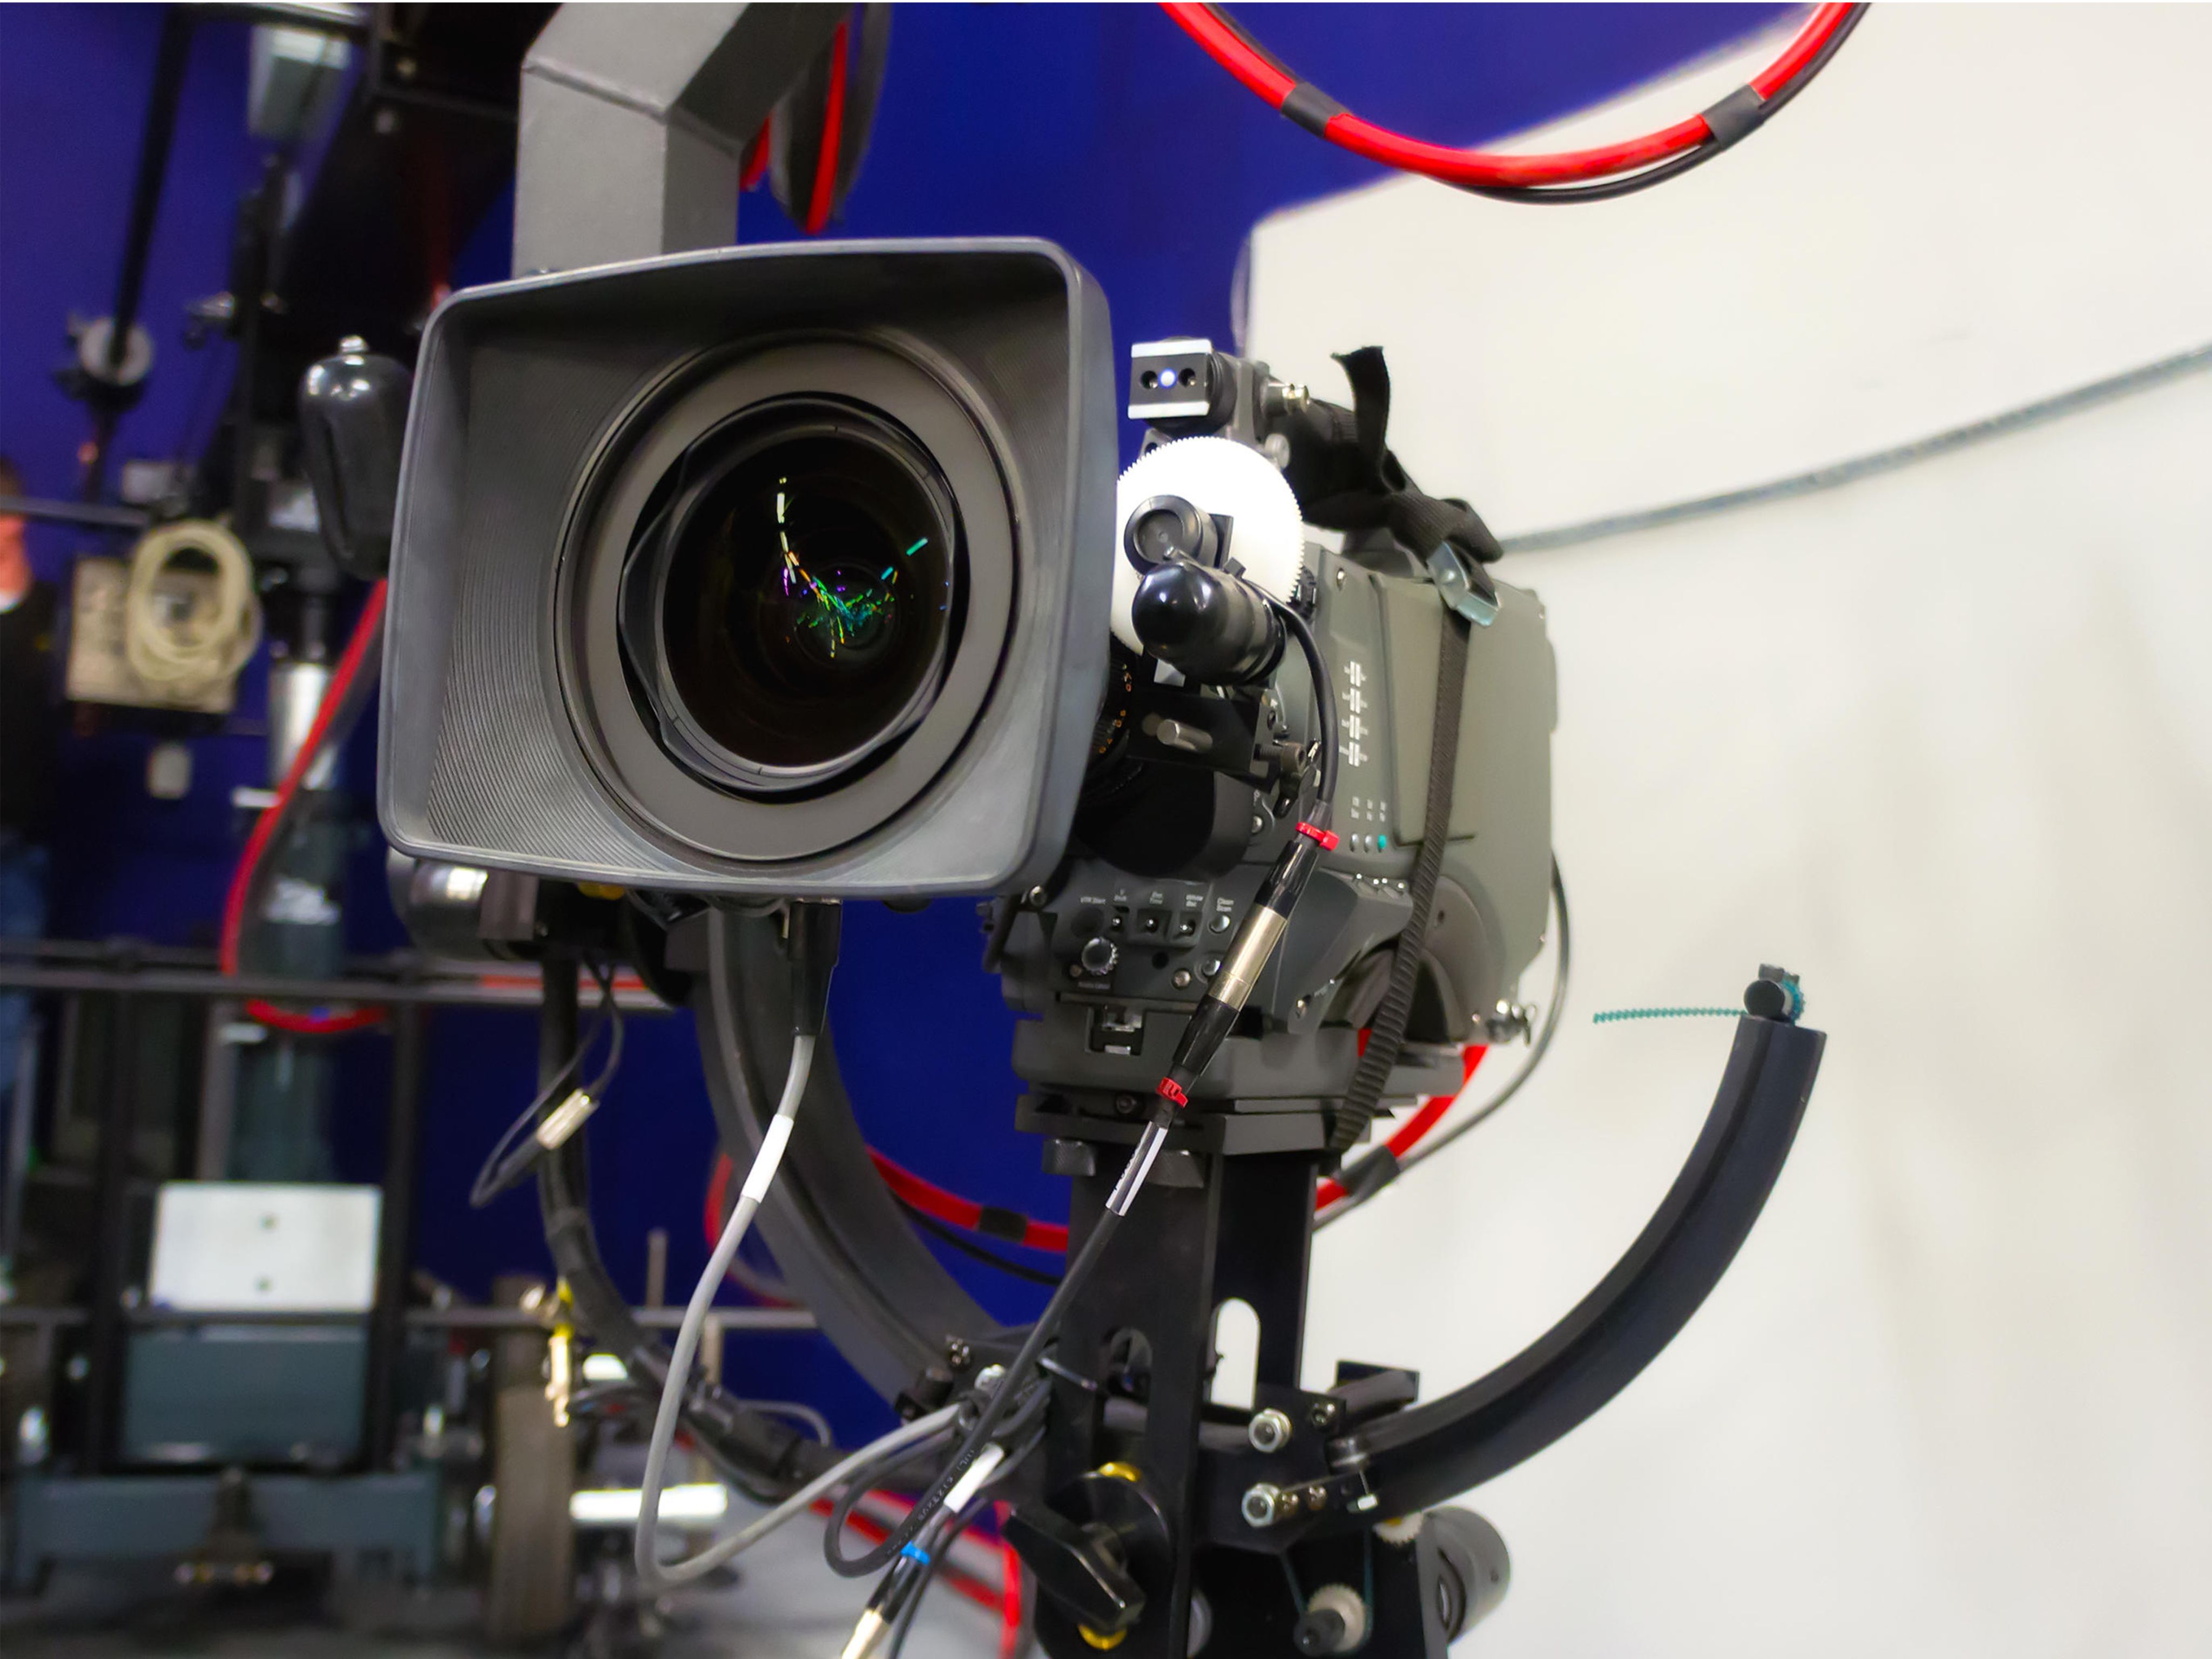 TV camera in TV studio with colours of Russian flag on walls in background